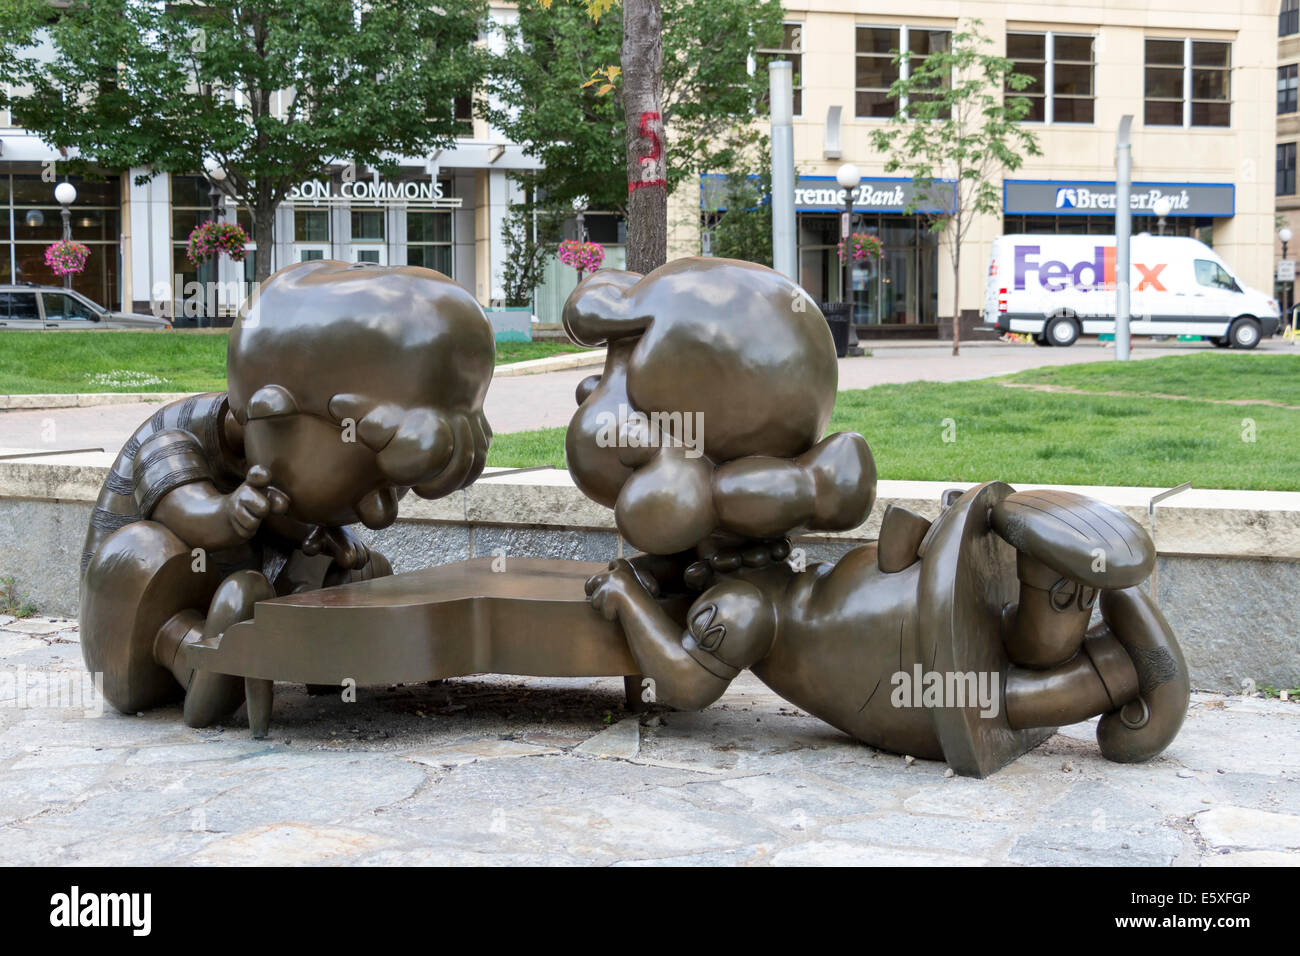 Statue of Charles M Schulz's Peanuts characters Schroeder and Lucy, Rice Park, St Paul, Minnesota, USA. Stock Photo